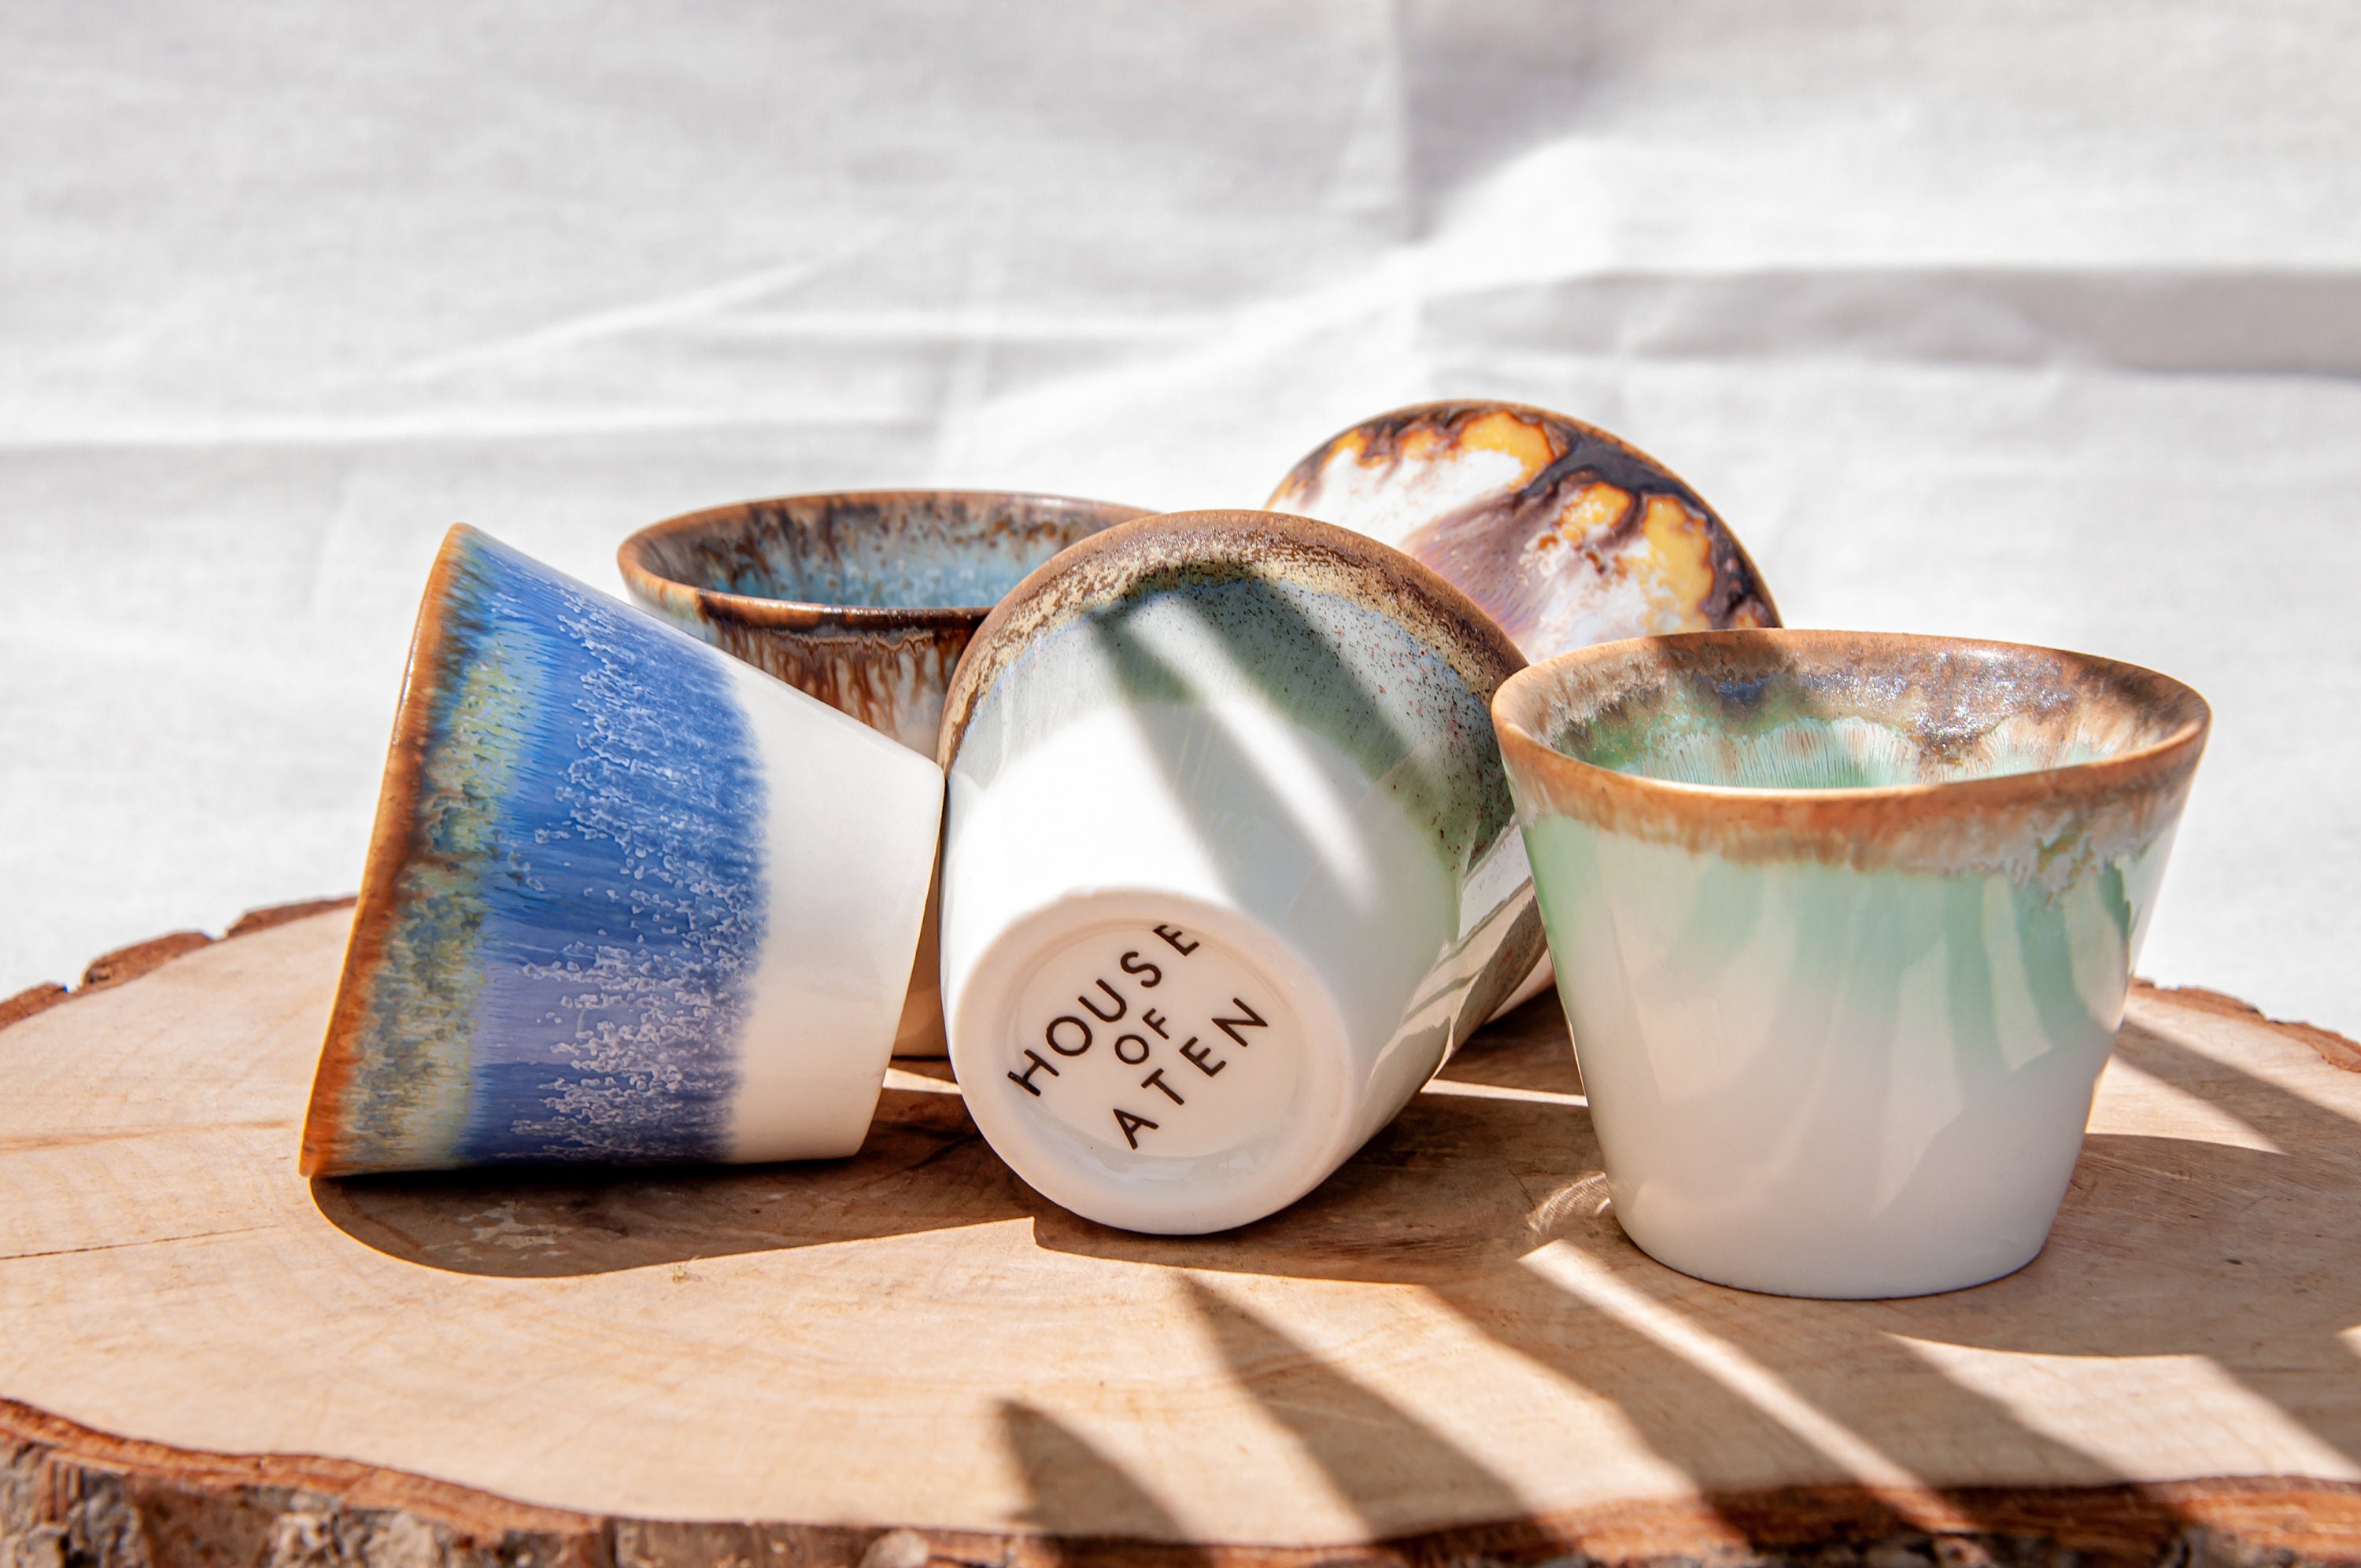 Comfify 4oz. Espresso Cups Set of 4 with Matching Saucers Multicolor